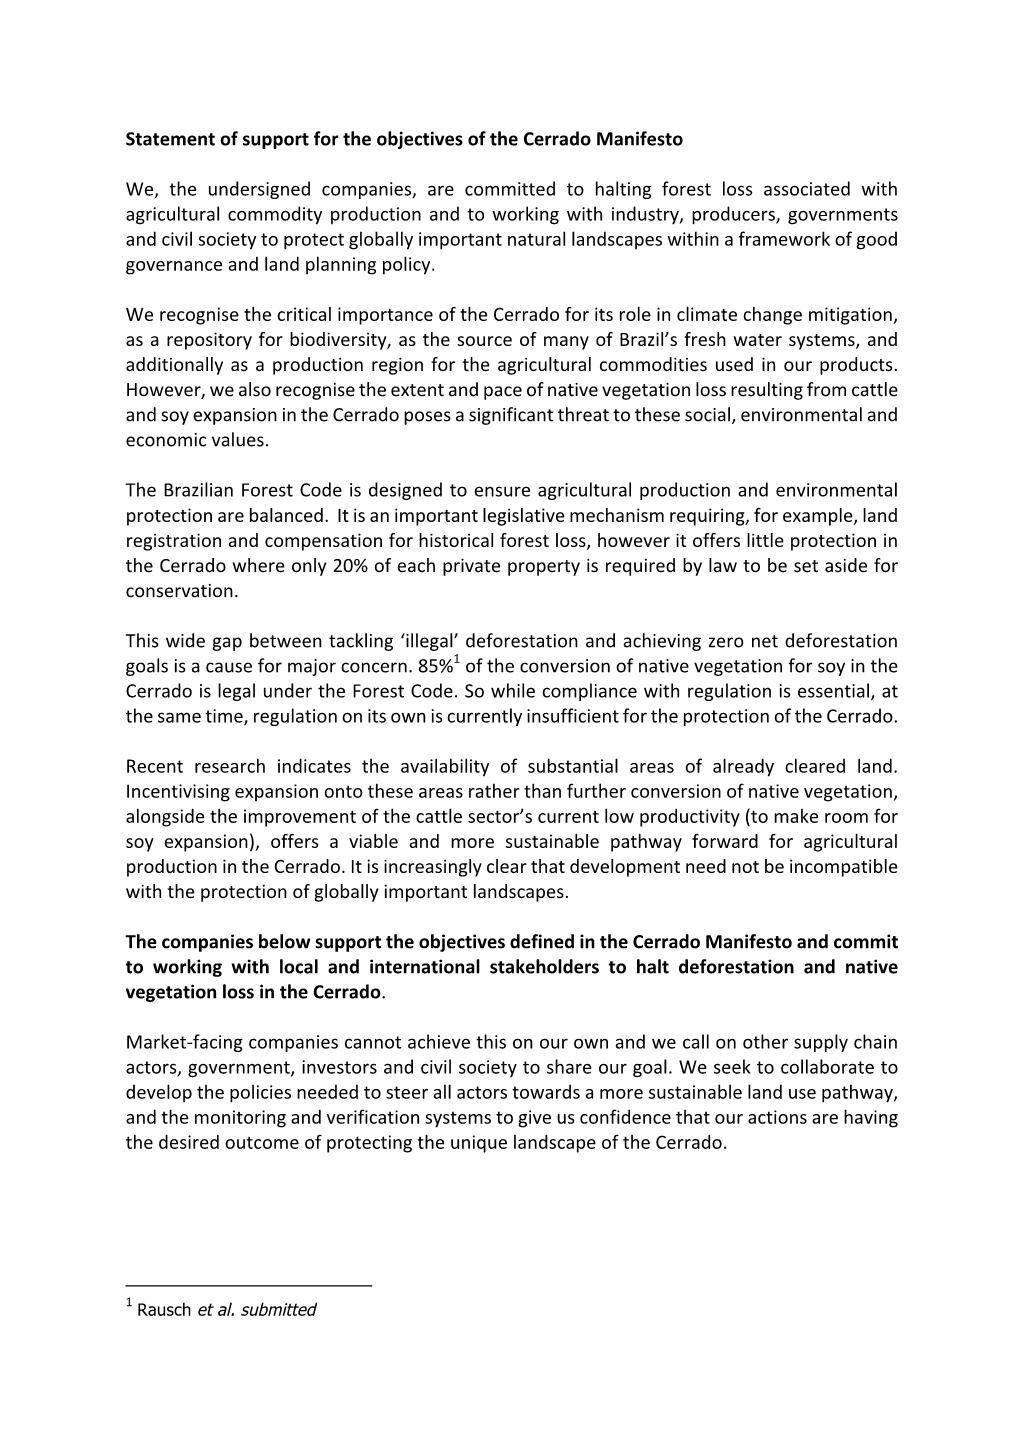 Statement of Support for the Objectives of the Cerrado Manifesto We, the Undersigned Companies, Are Committed to Halting